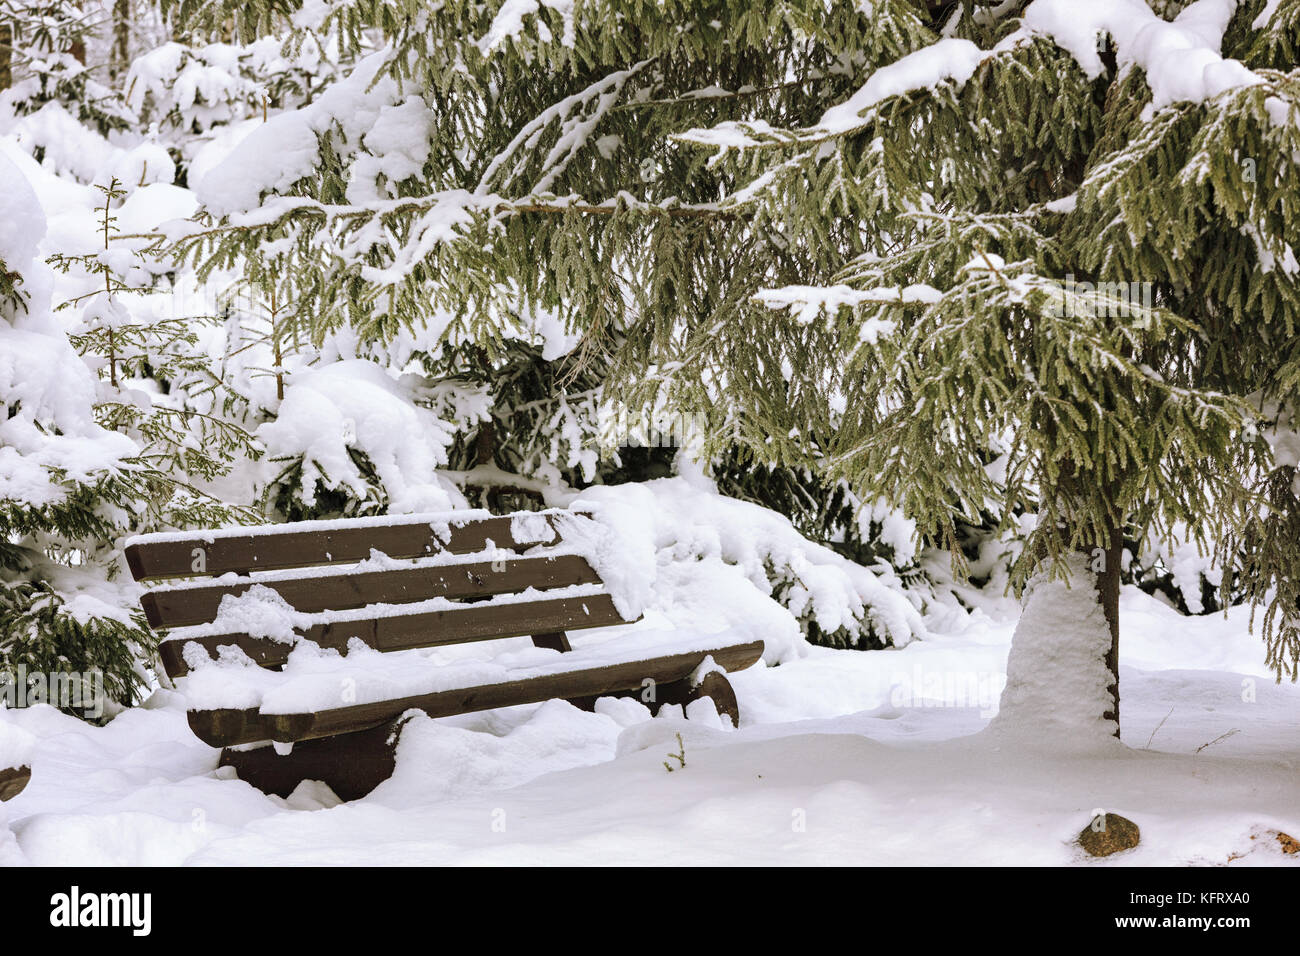 Snow-covered bench in the shade of a Christmas tree in winter. Stock Photo